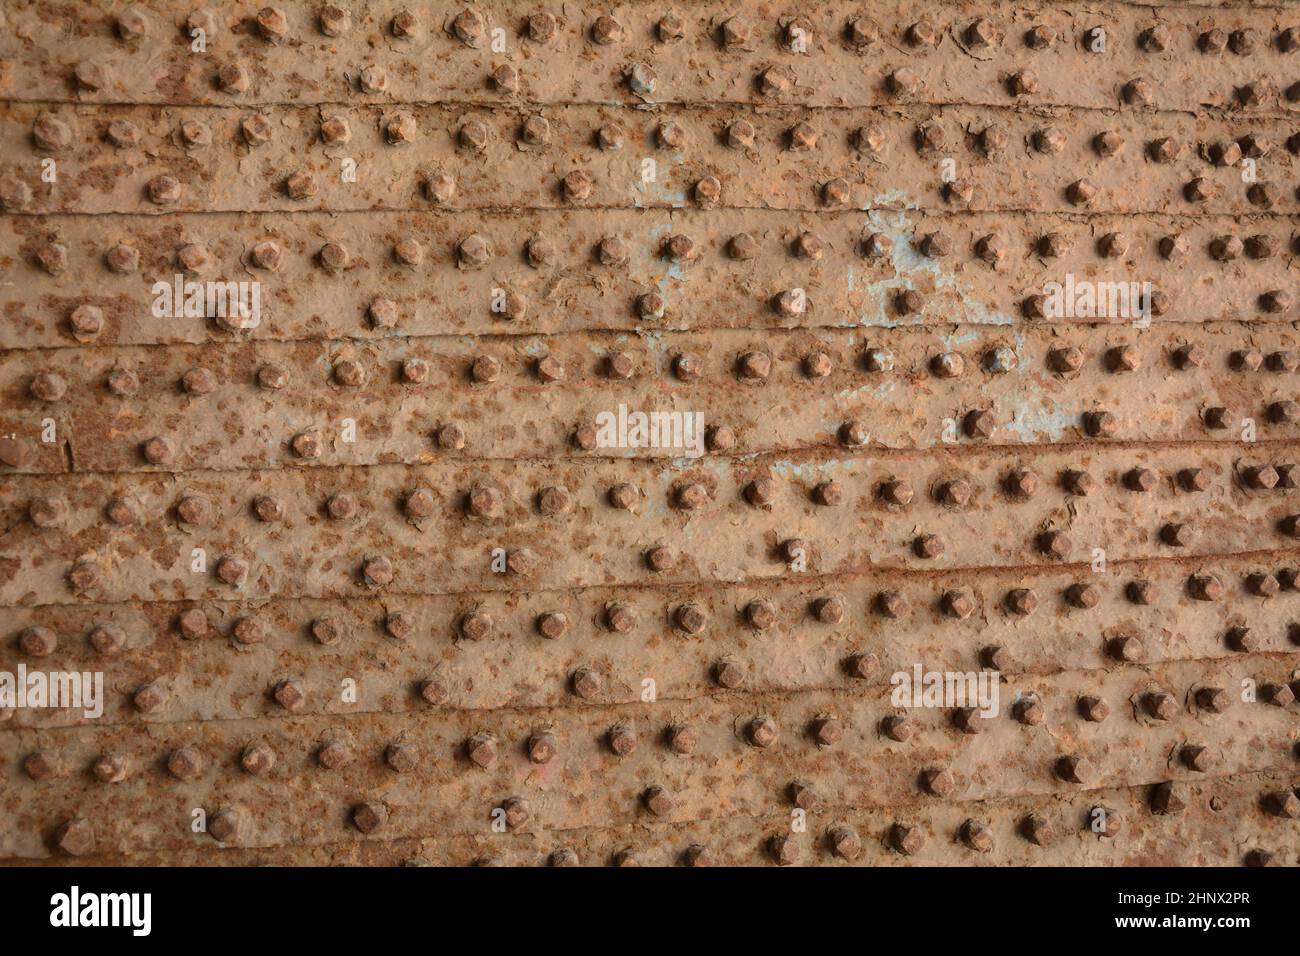 Part of old metal gates with cast patterns detail. Texture of the old gate with metal rivets. Akko(Acre) Israel Stock Photo